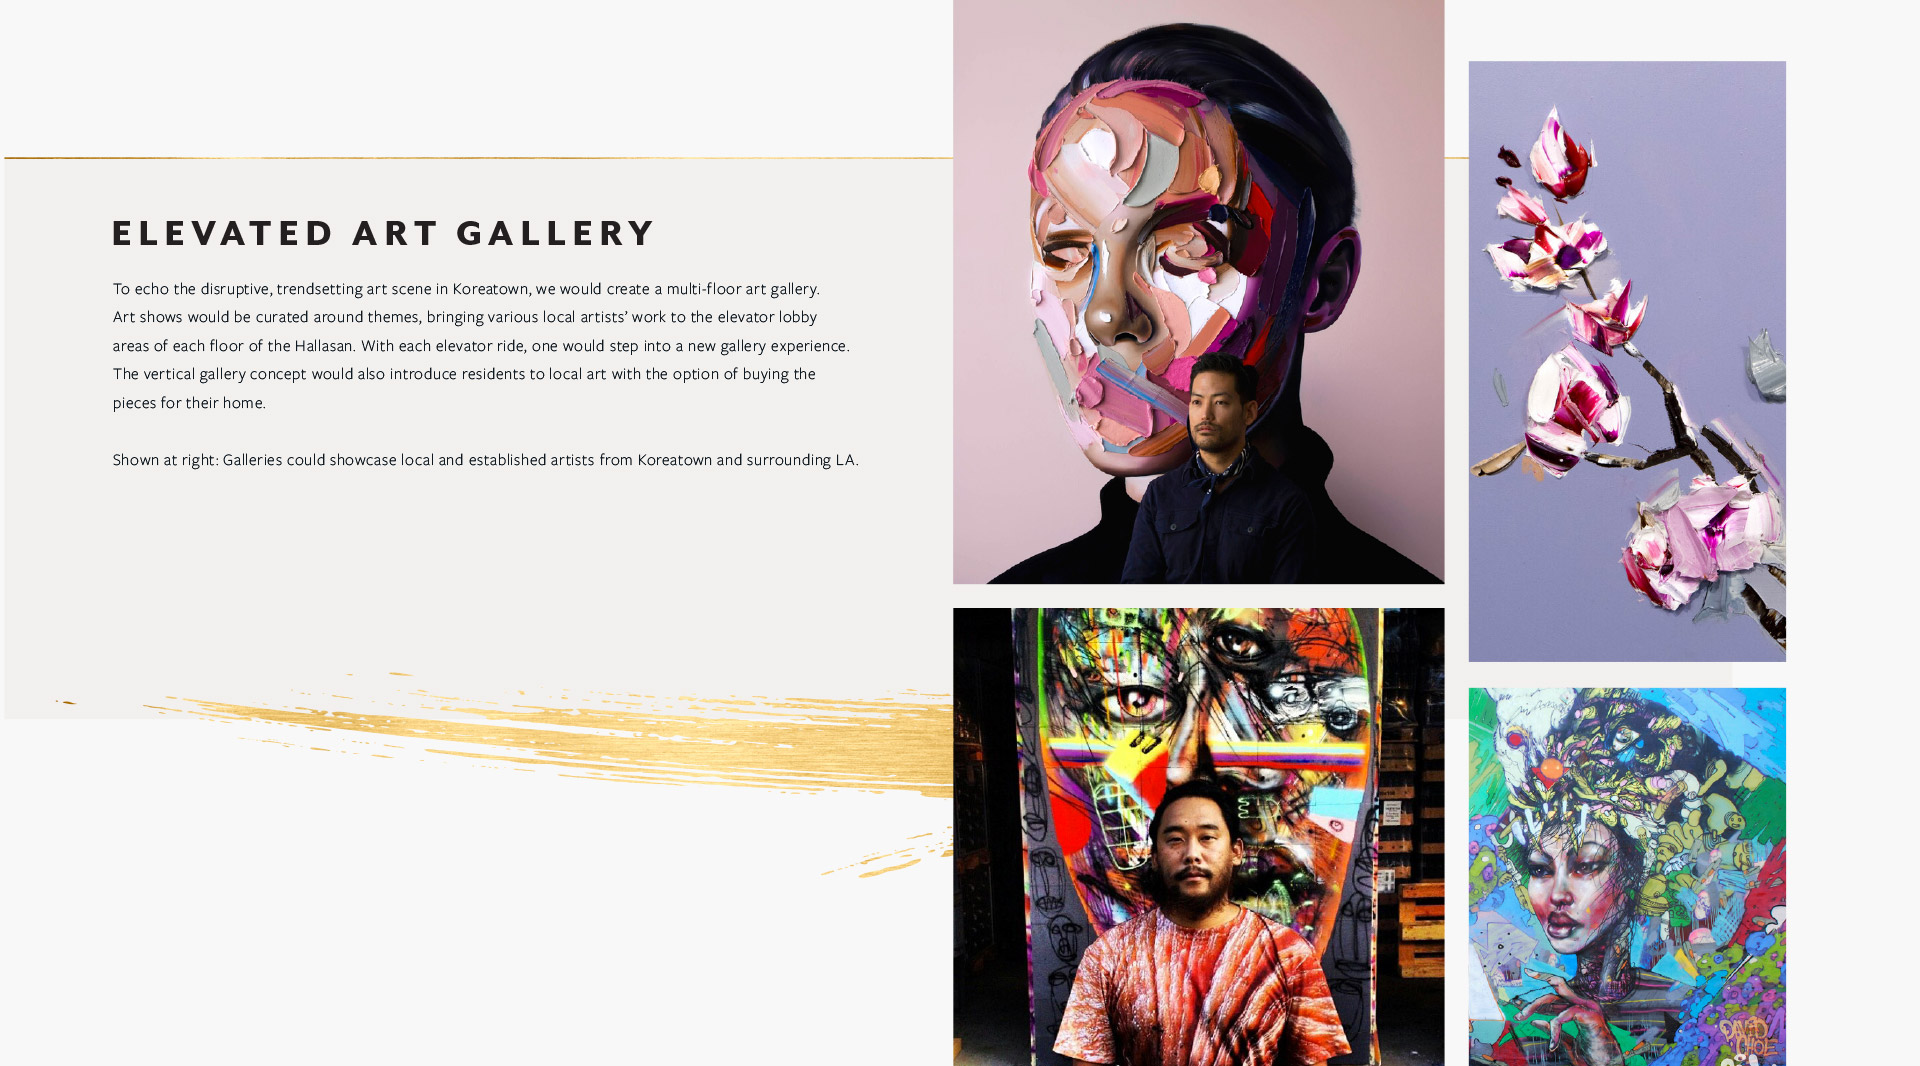 Art gallery concept created for Hallasan Luxury Apartments brand